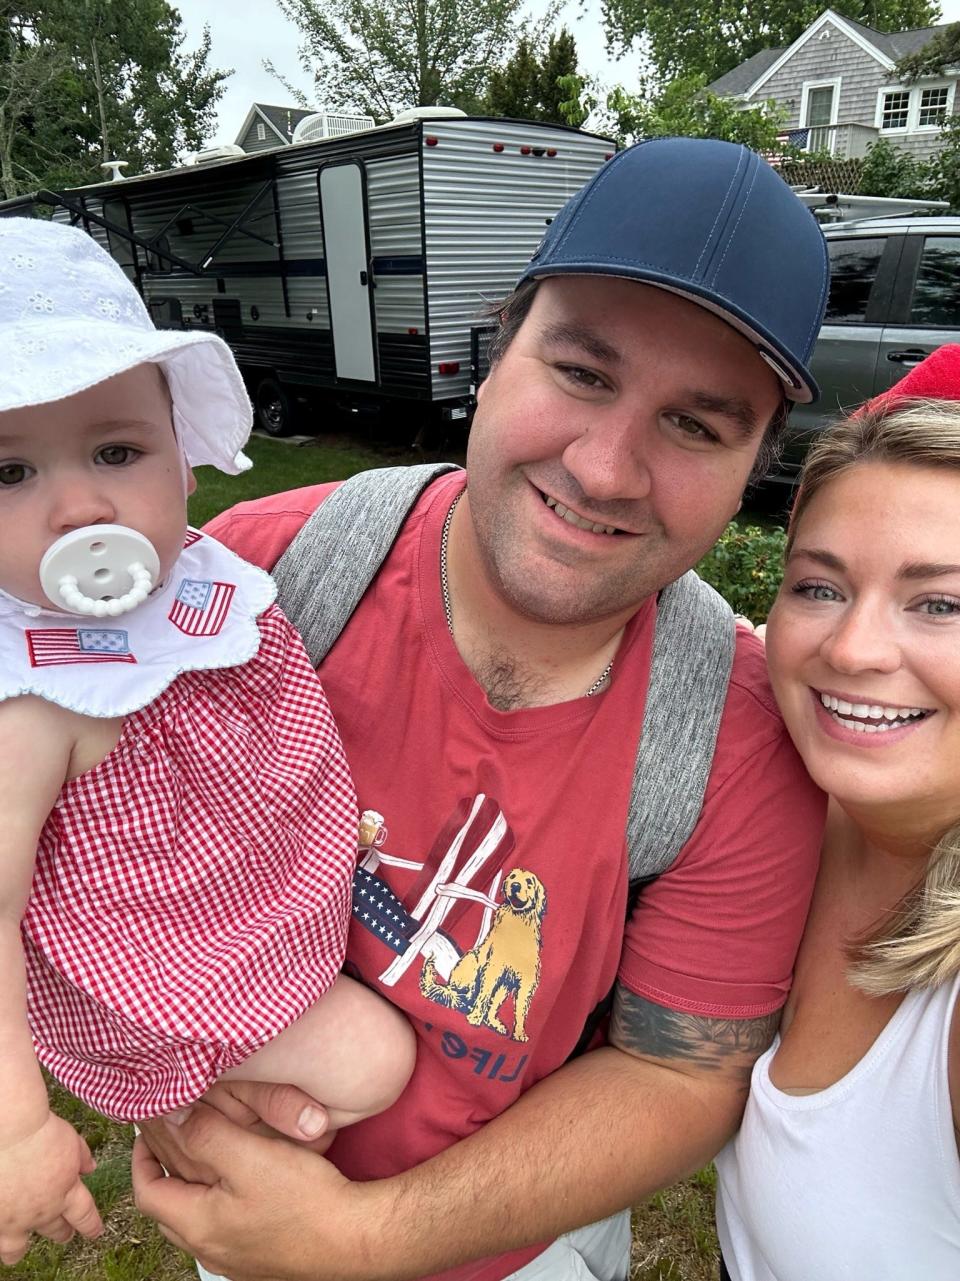 Steven Nasta, seen here with his wife, Andrea, and their daughter, Emma, is one of several new full-time firefighters at Kennebunk Fire Rescue in Kennebunk, Maine.